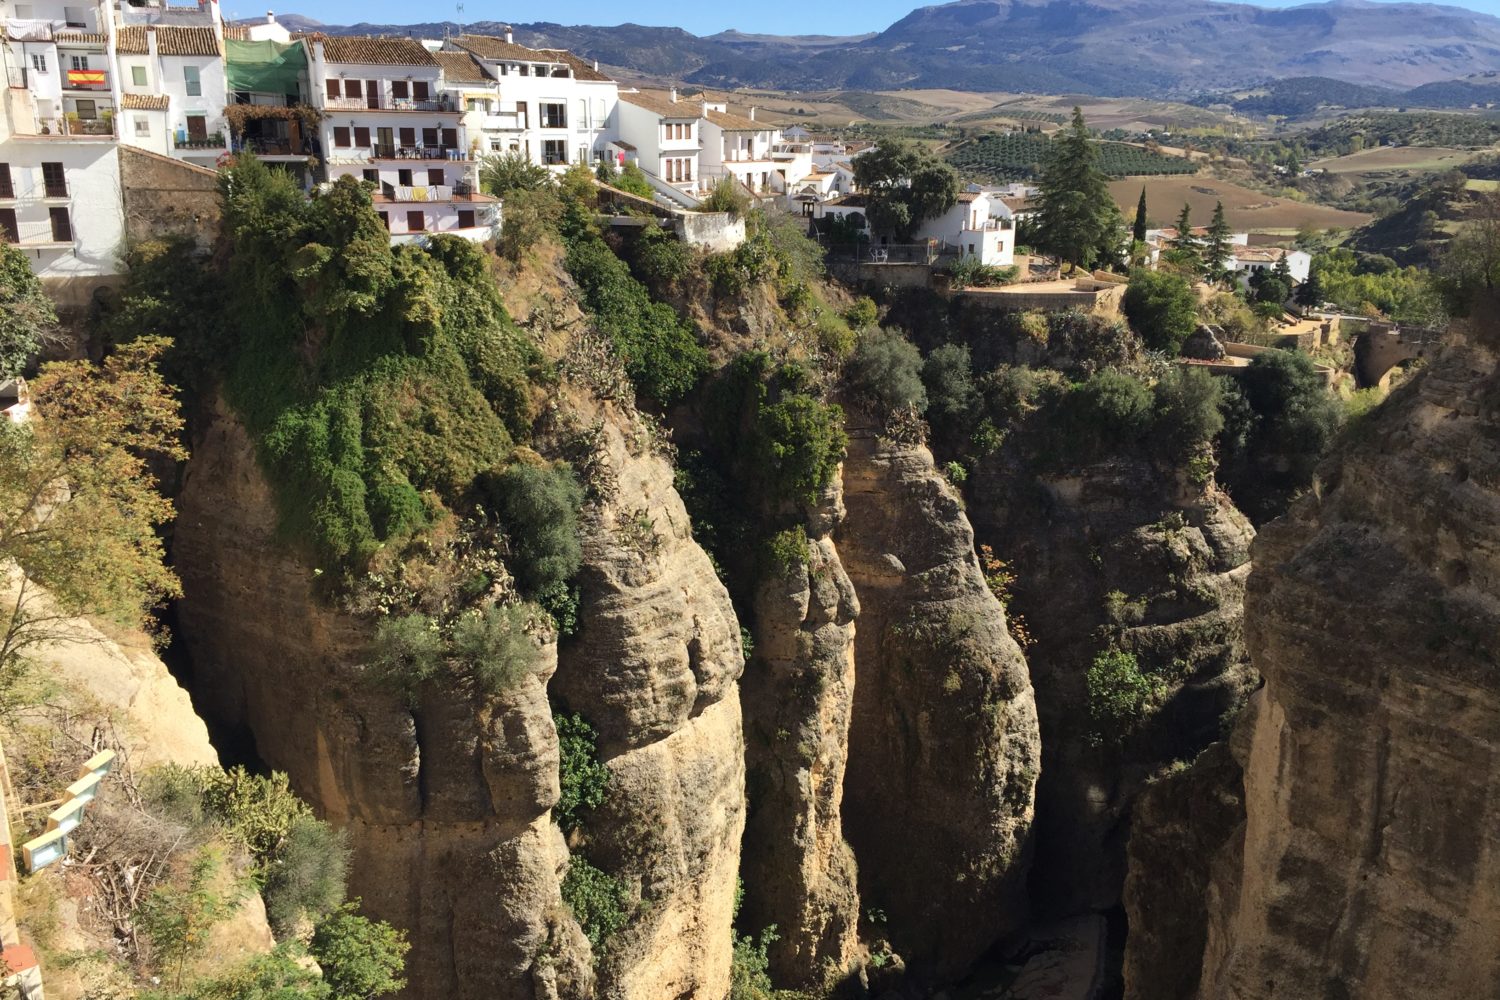 Self-guided cycling tour of Spain's Andalusia White Villages Biking Tour